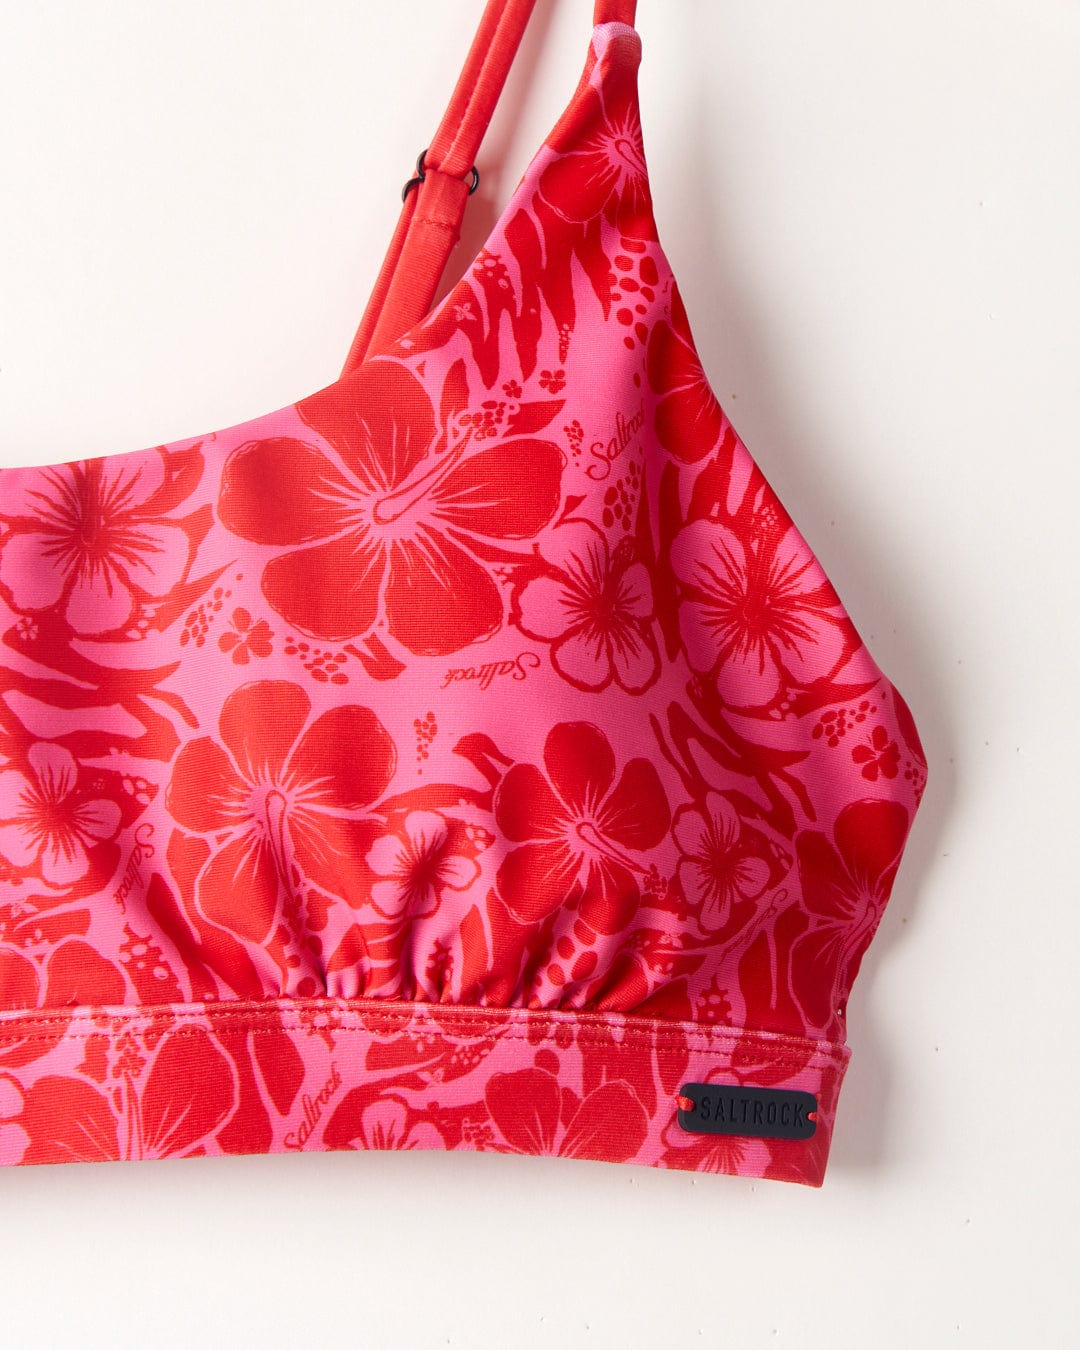 Cleo Hibiscus swim top with saltrock logo on a white background.